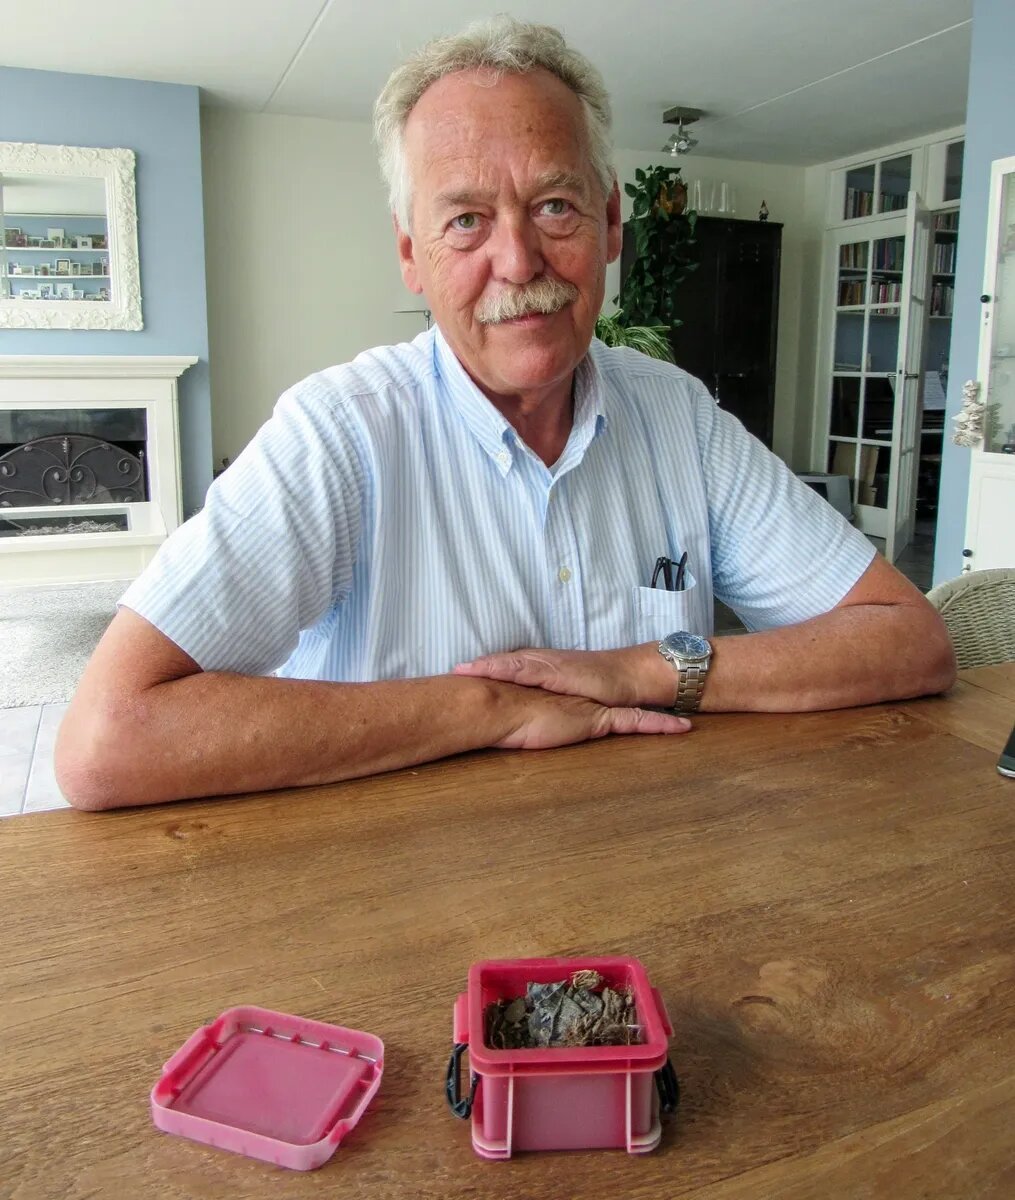 Piet Ploeg. In front of him on the table is a box of soil from the crash site. Photo: Ekaterina Glikman